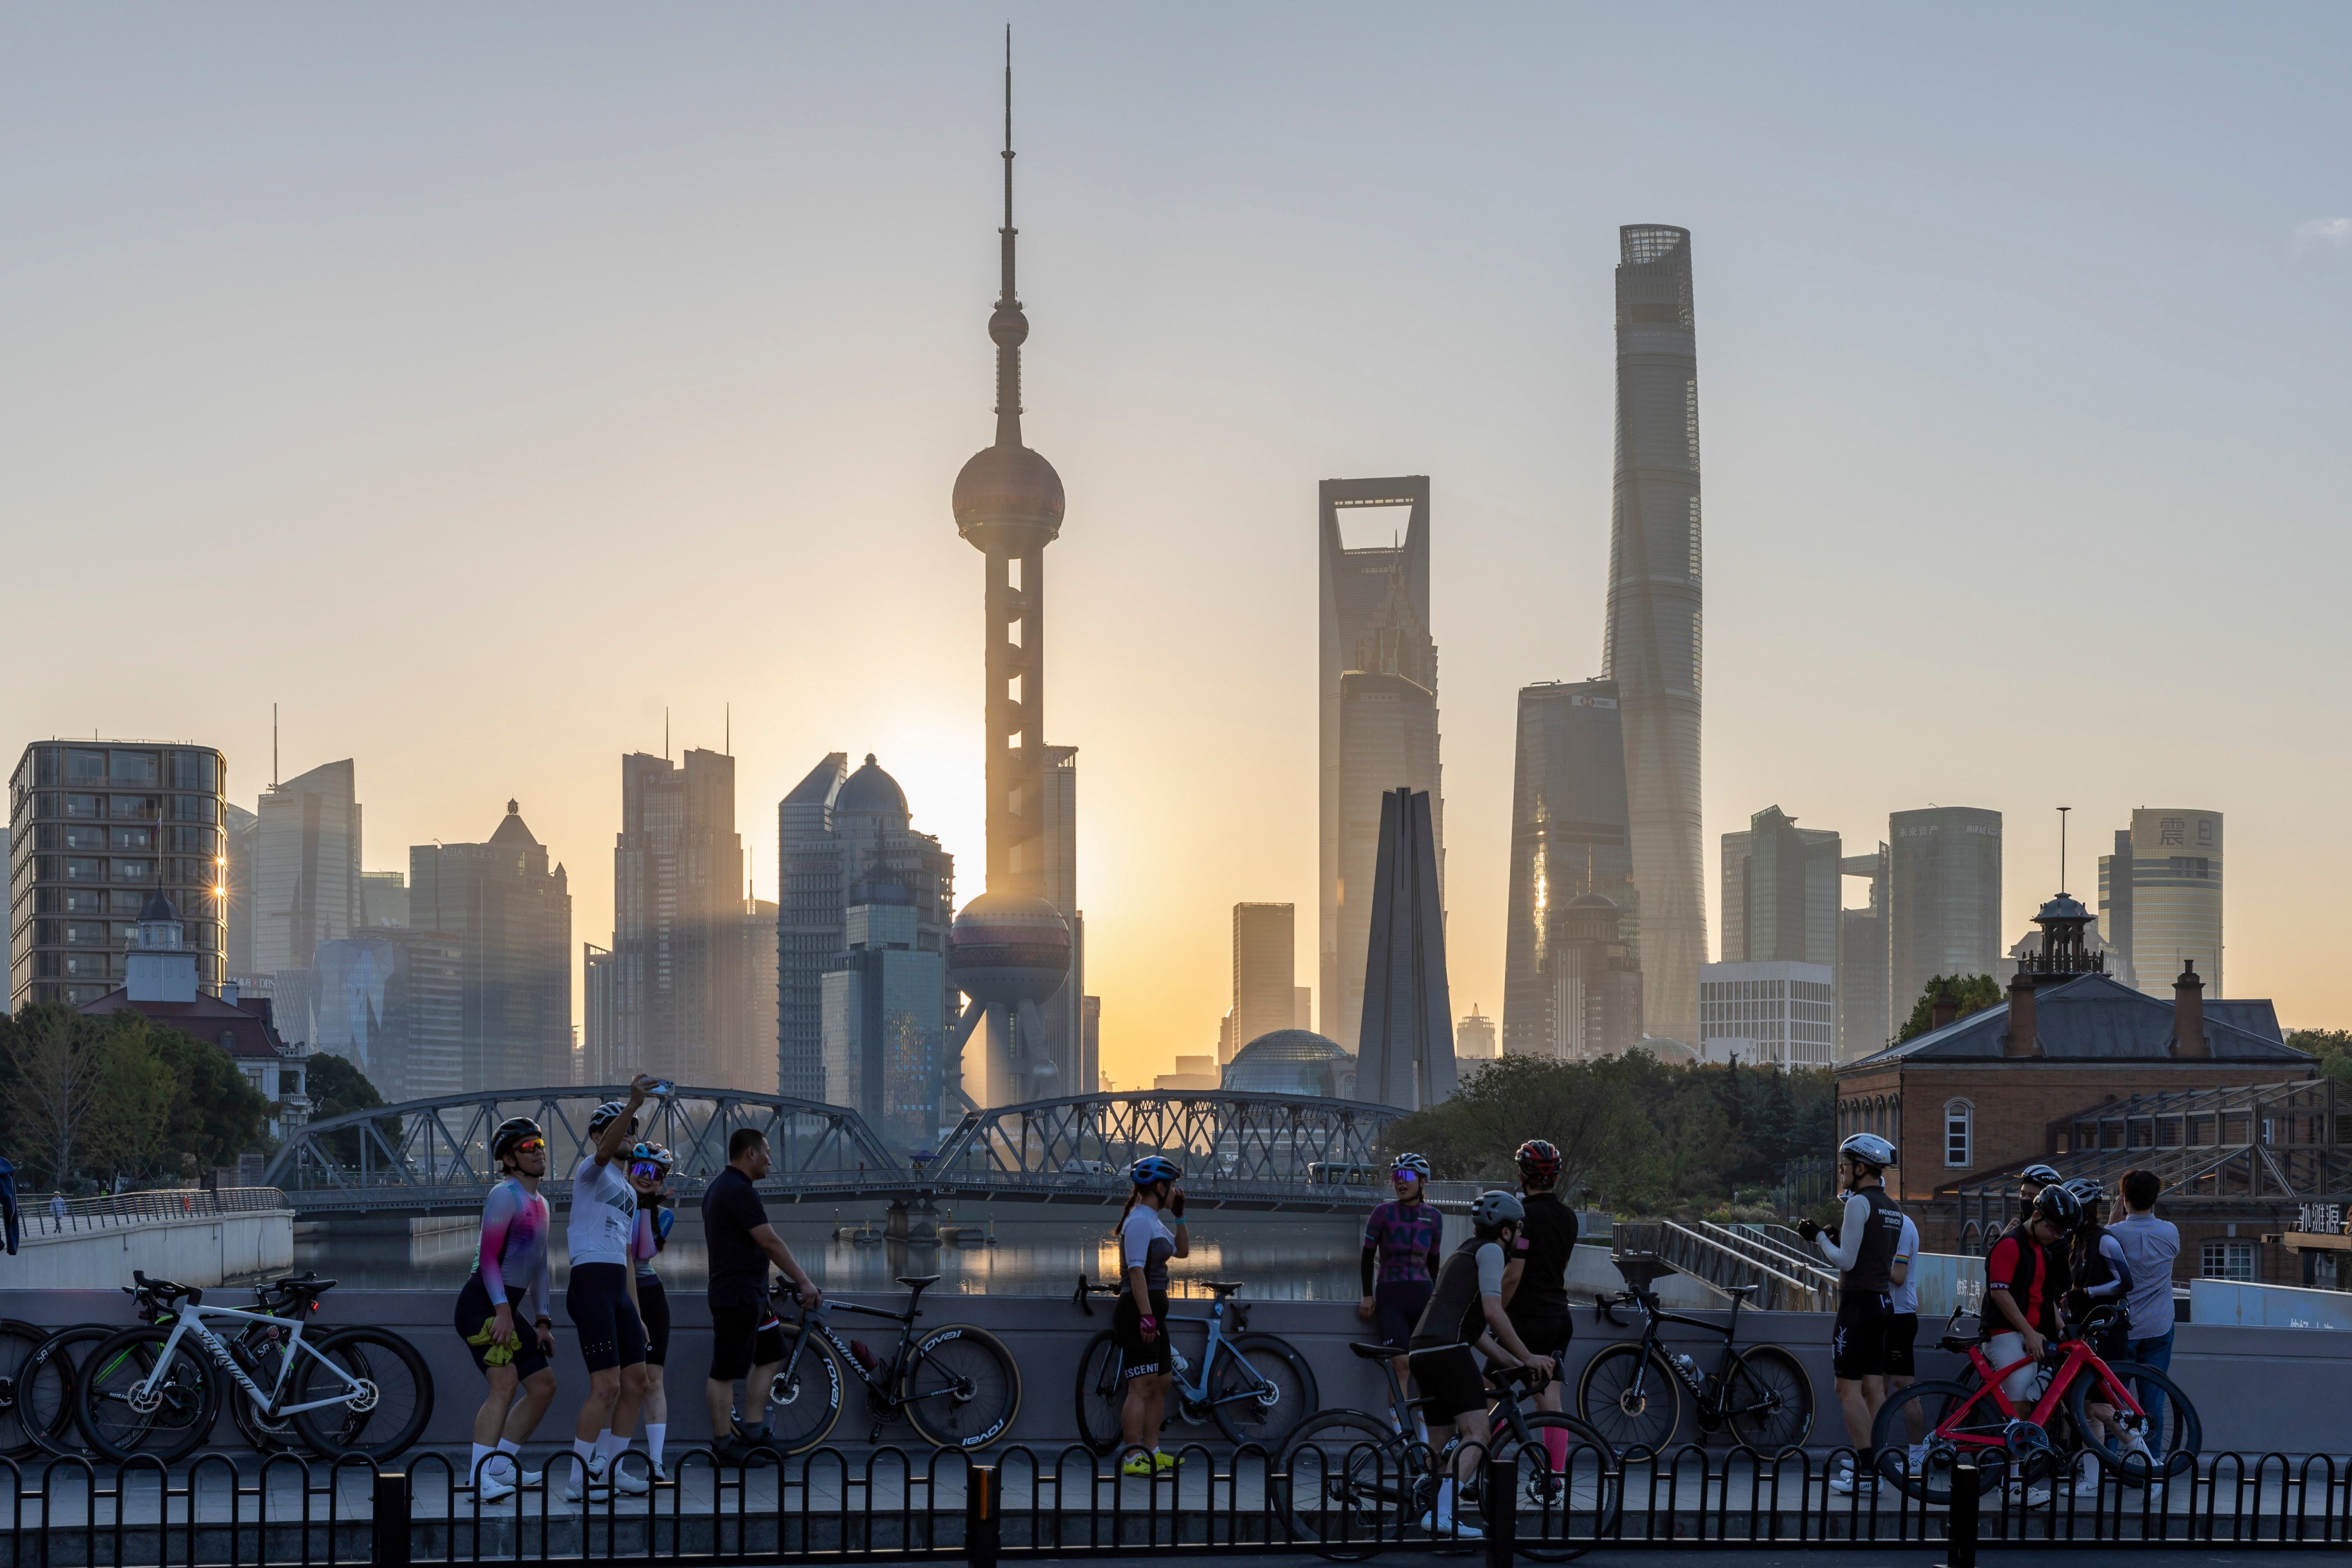 Shanghai has vowed to ramp up efforts to turn itself into a socialist, modern and international metropolis under Chinese President Xi Jinping’s strategic planning. Photo: AP